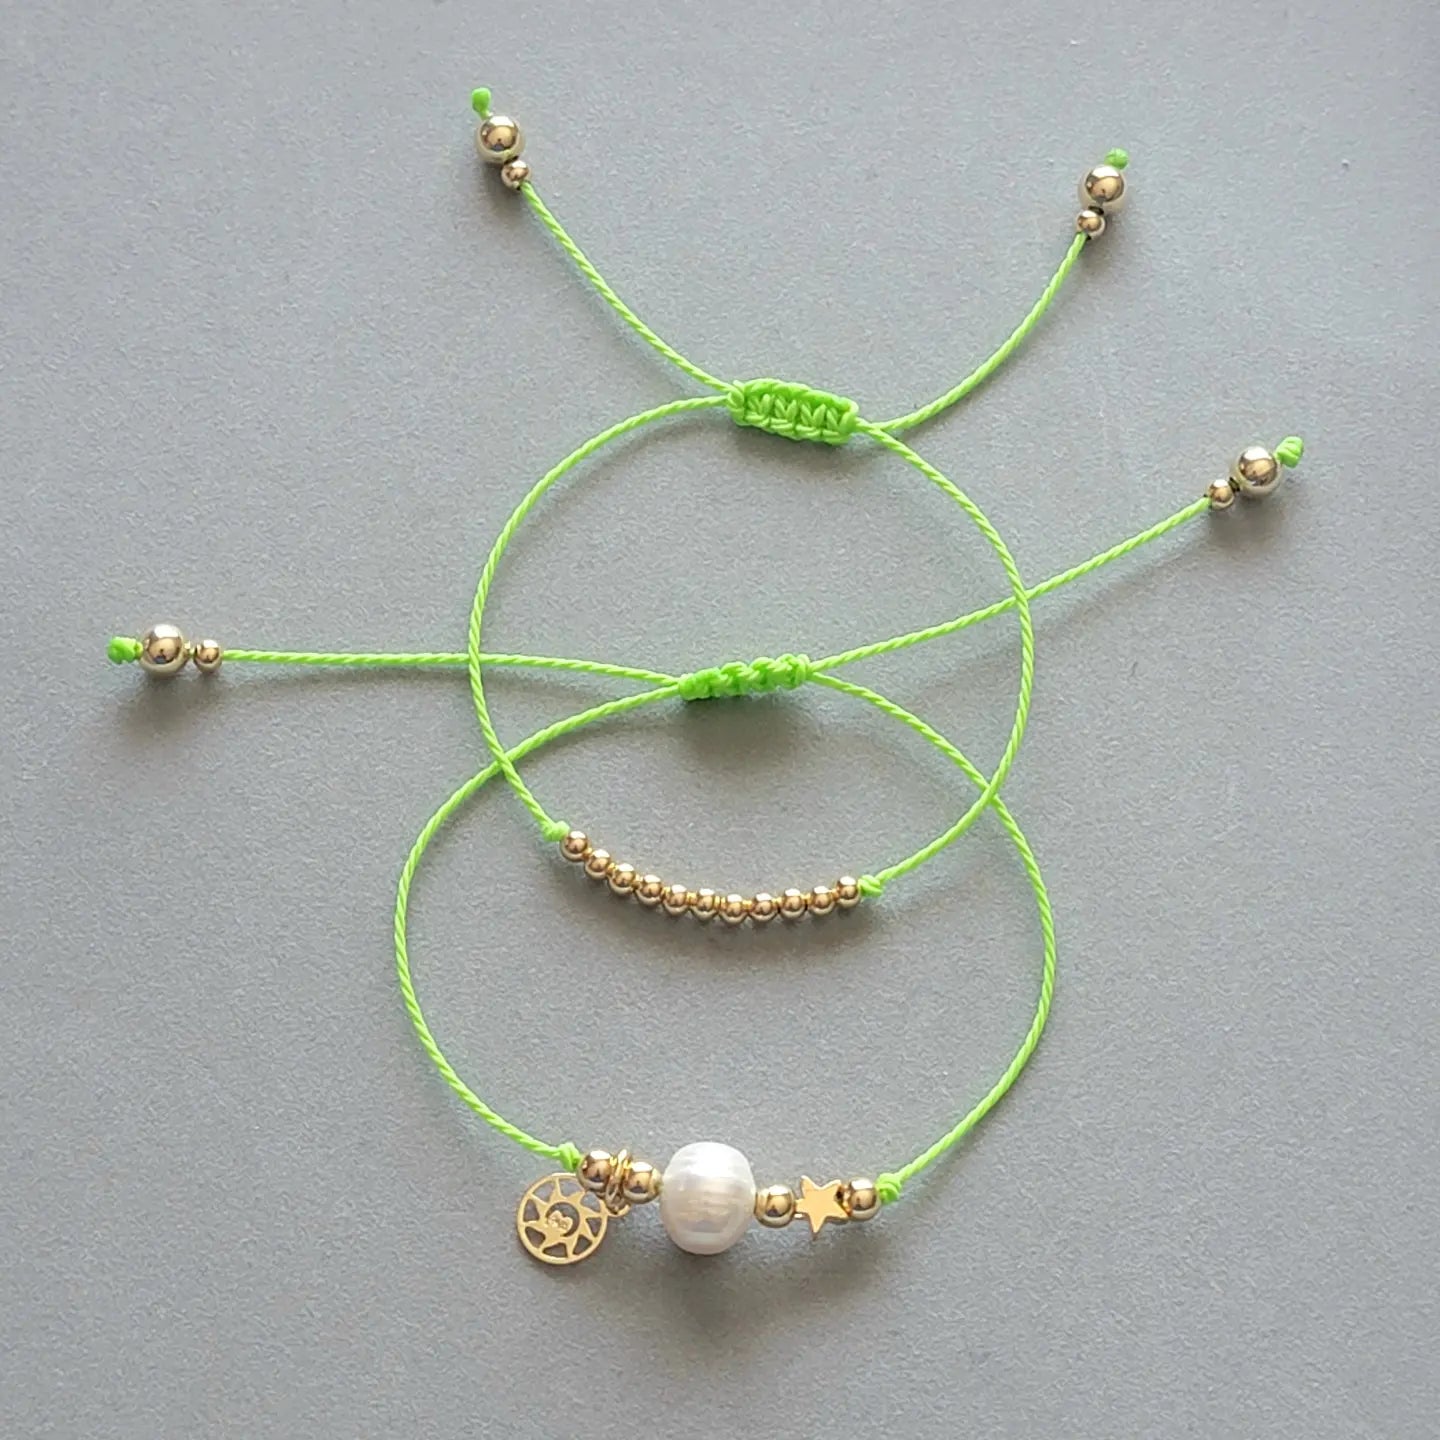 Set of 2 Bracelets With 18K Gold-filled Beads, Freshwater Pearl, Mix & Match Colors